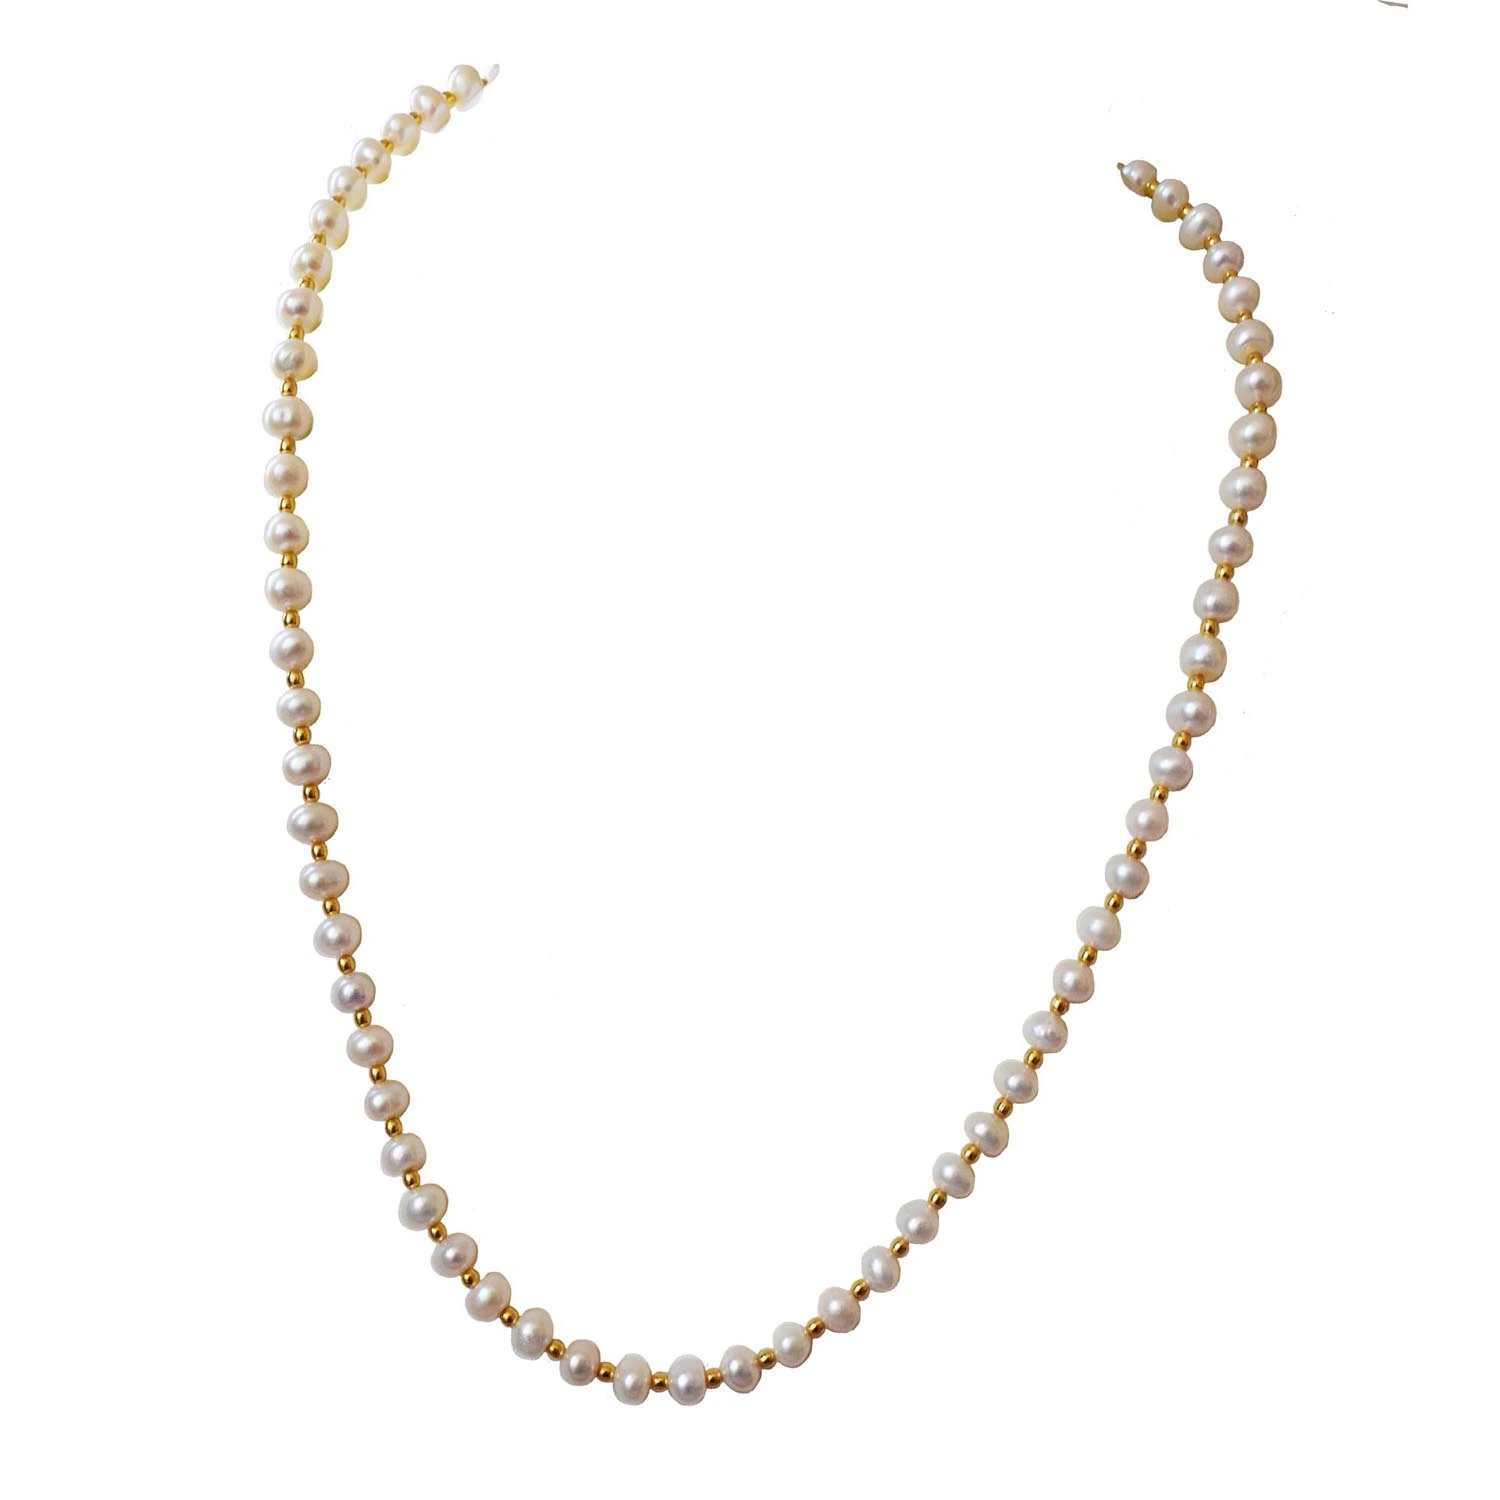 Real Freshwater Pearl Gold Plated Beads Necklace